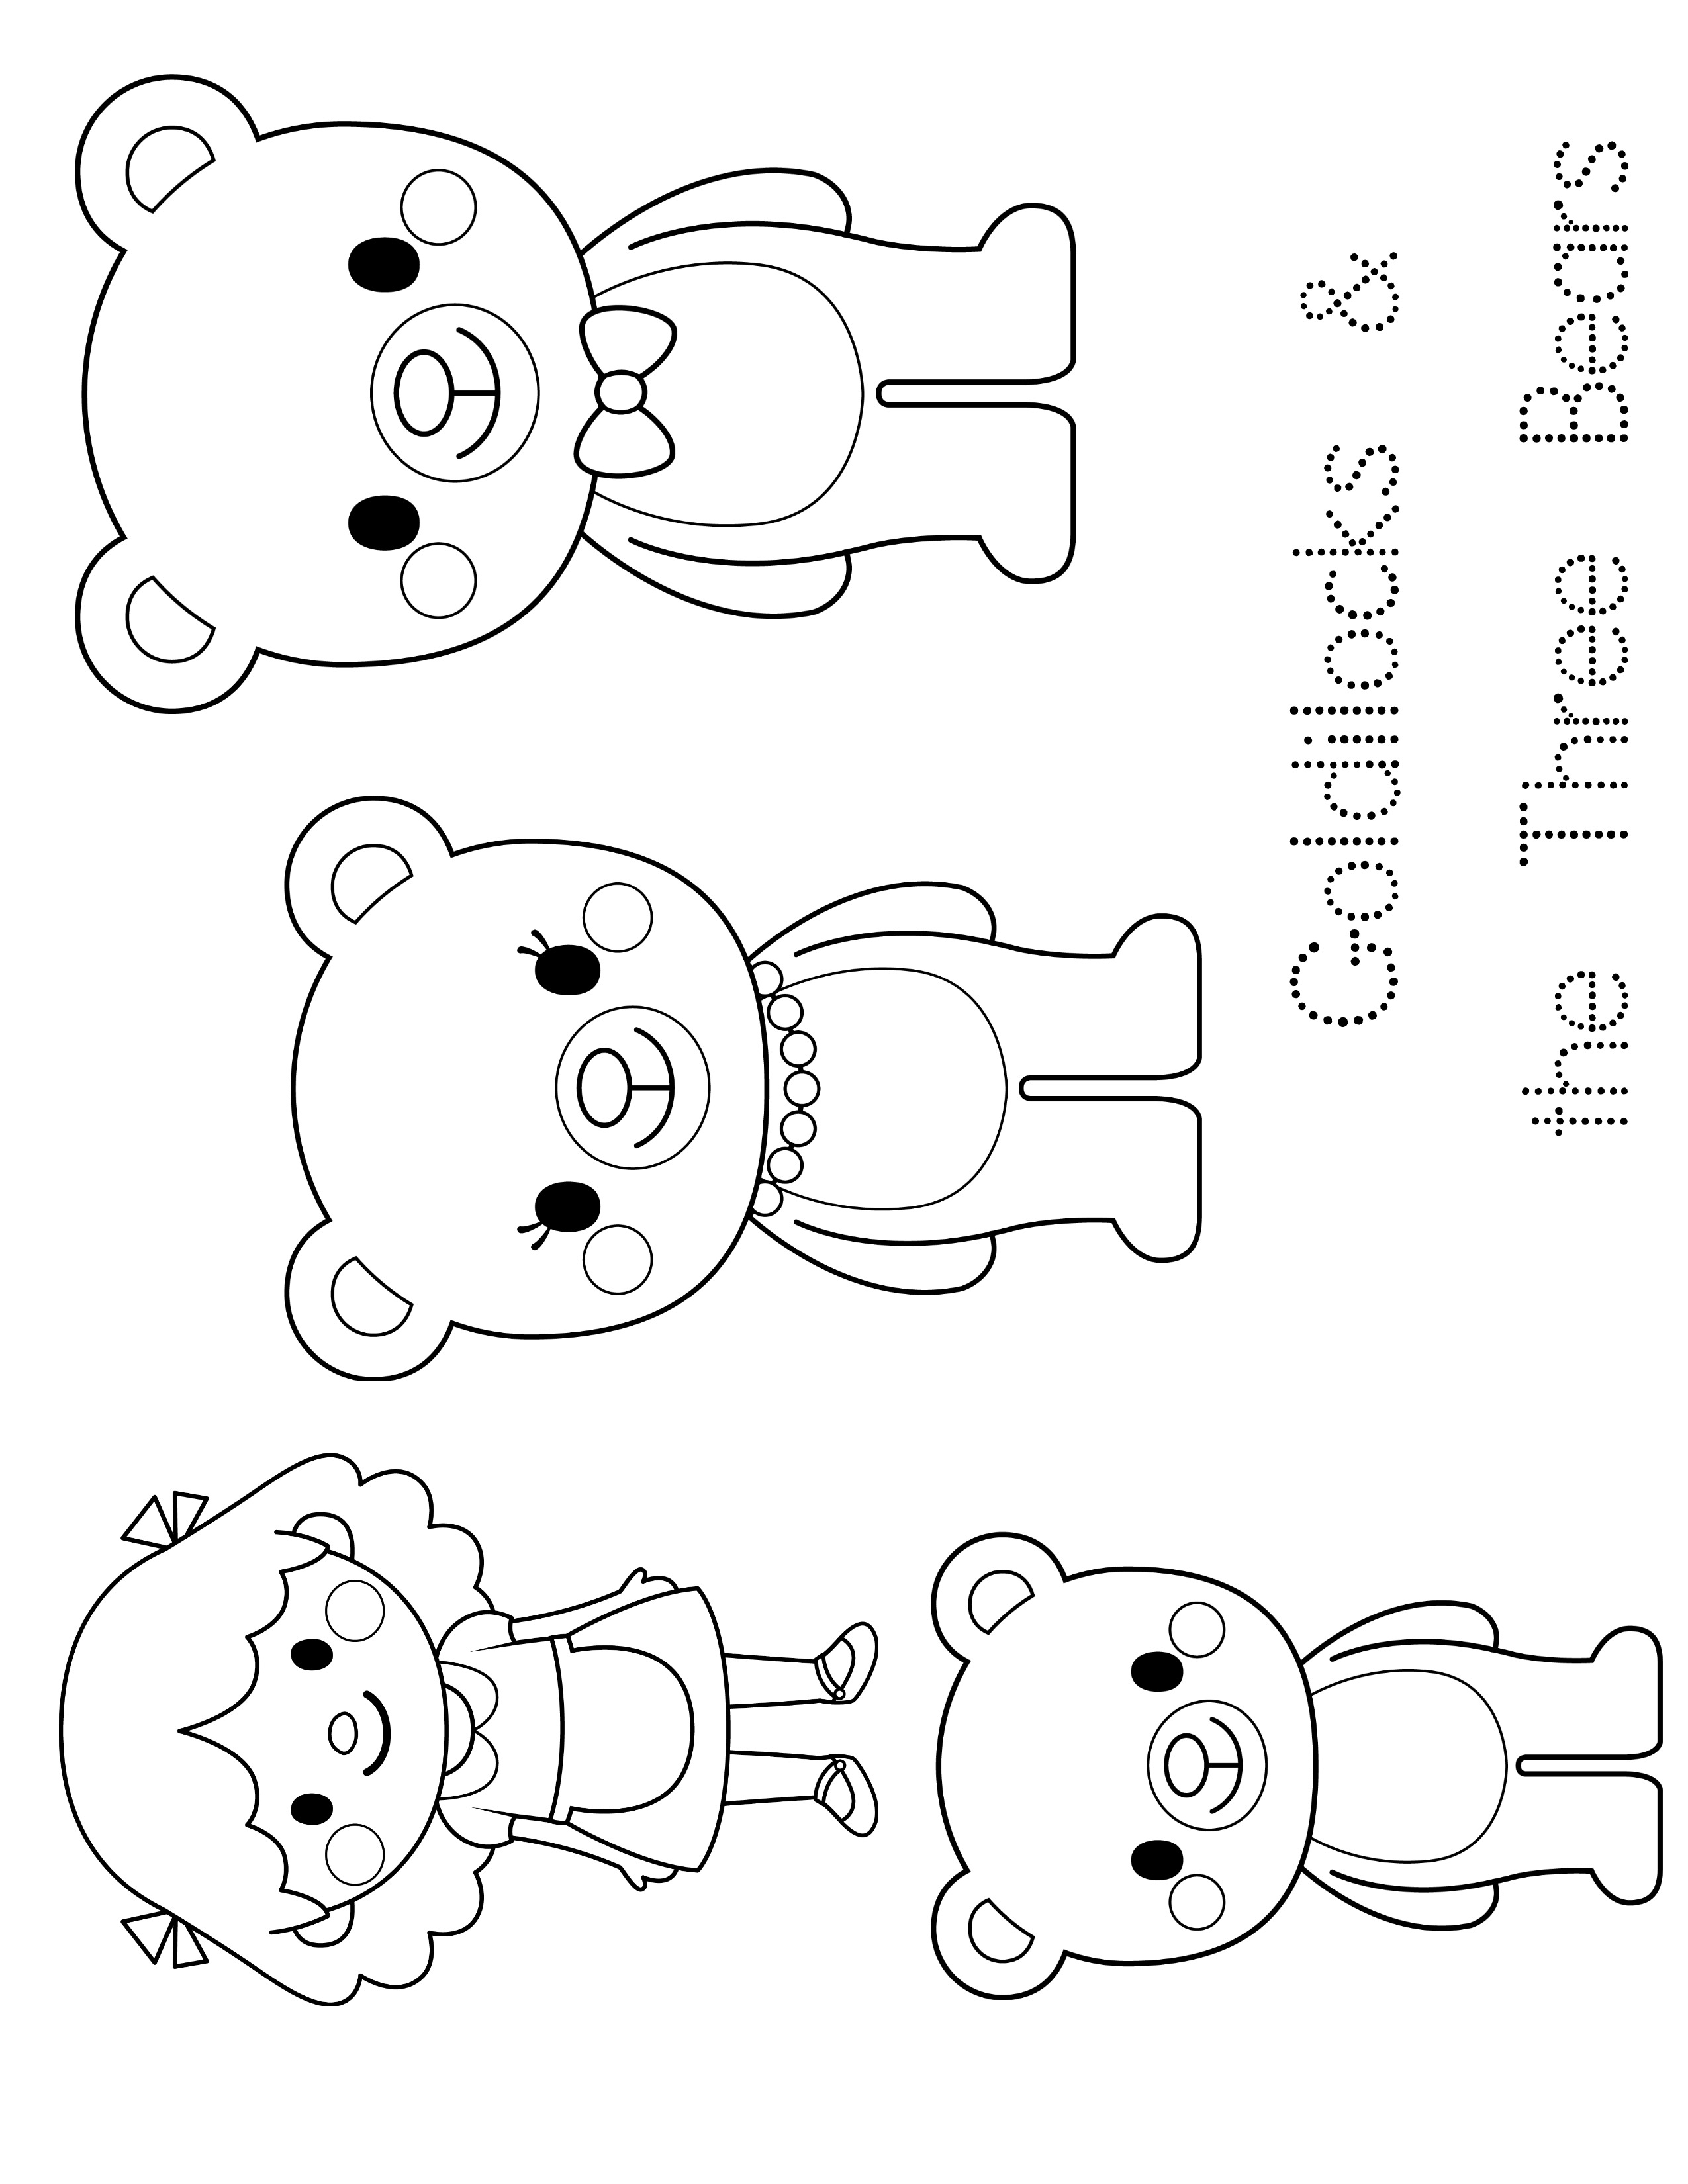 Goldilocks And The Three Bears Coloring Pages Free at